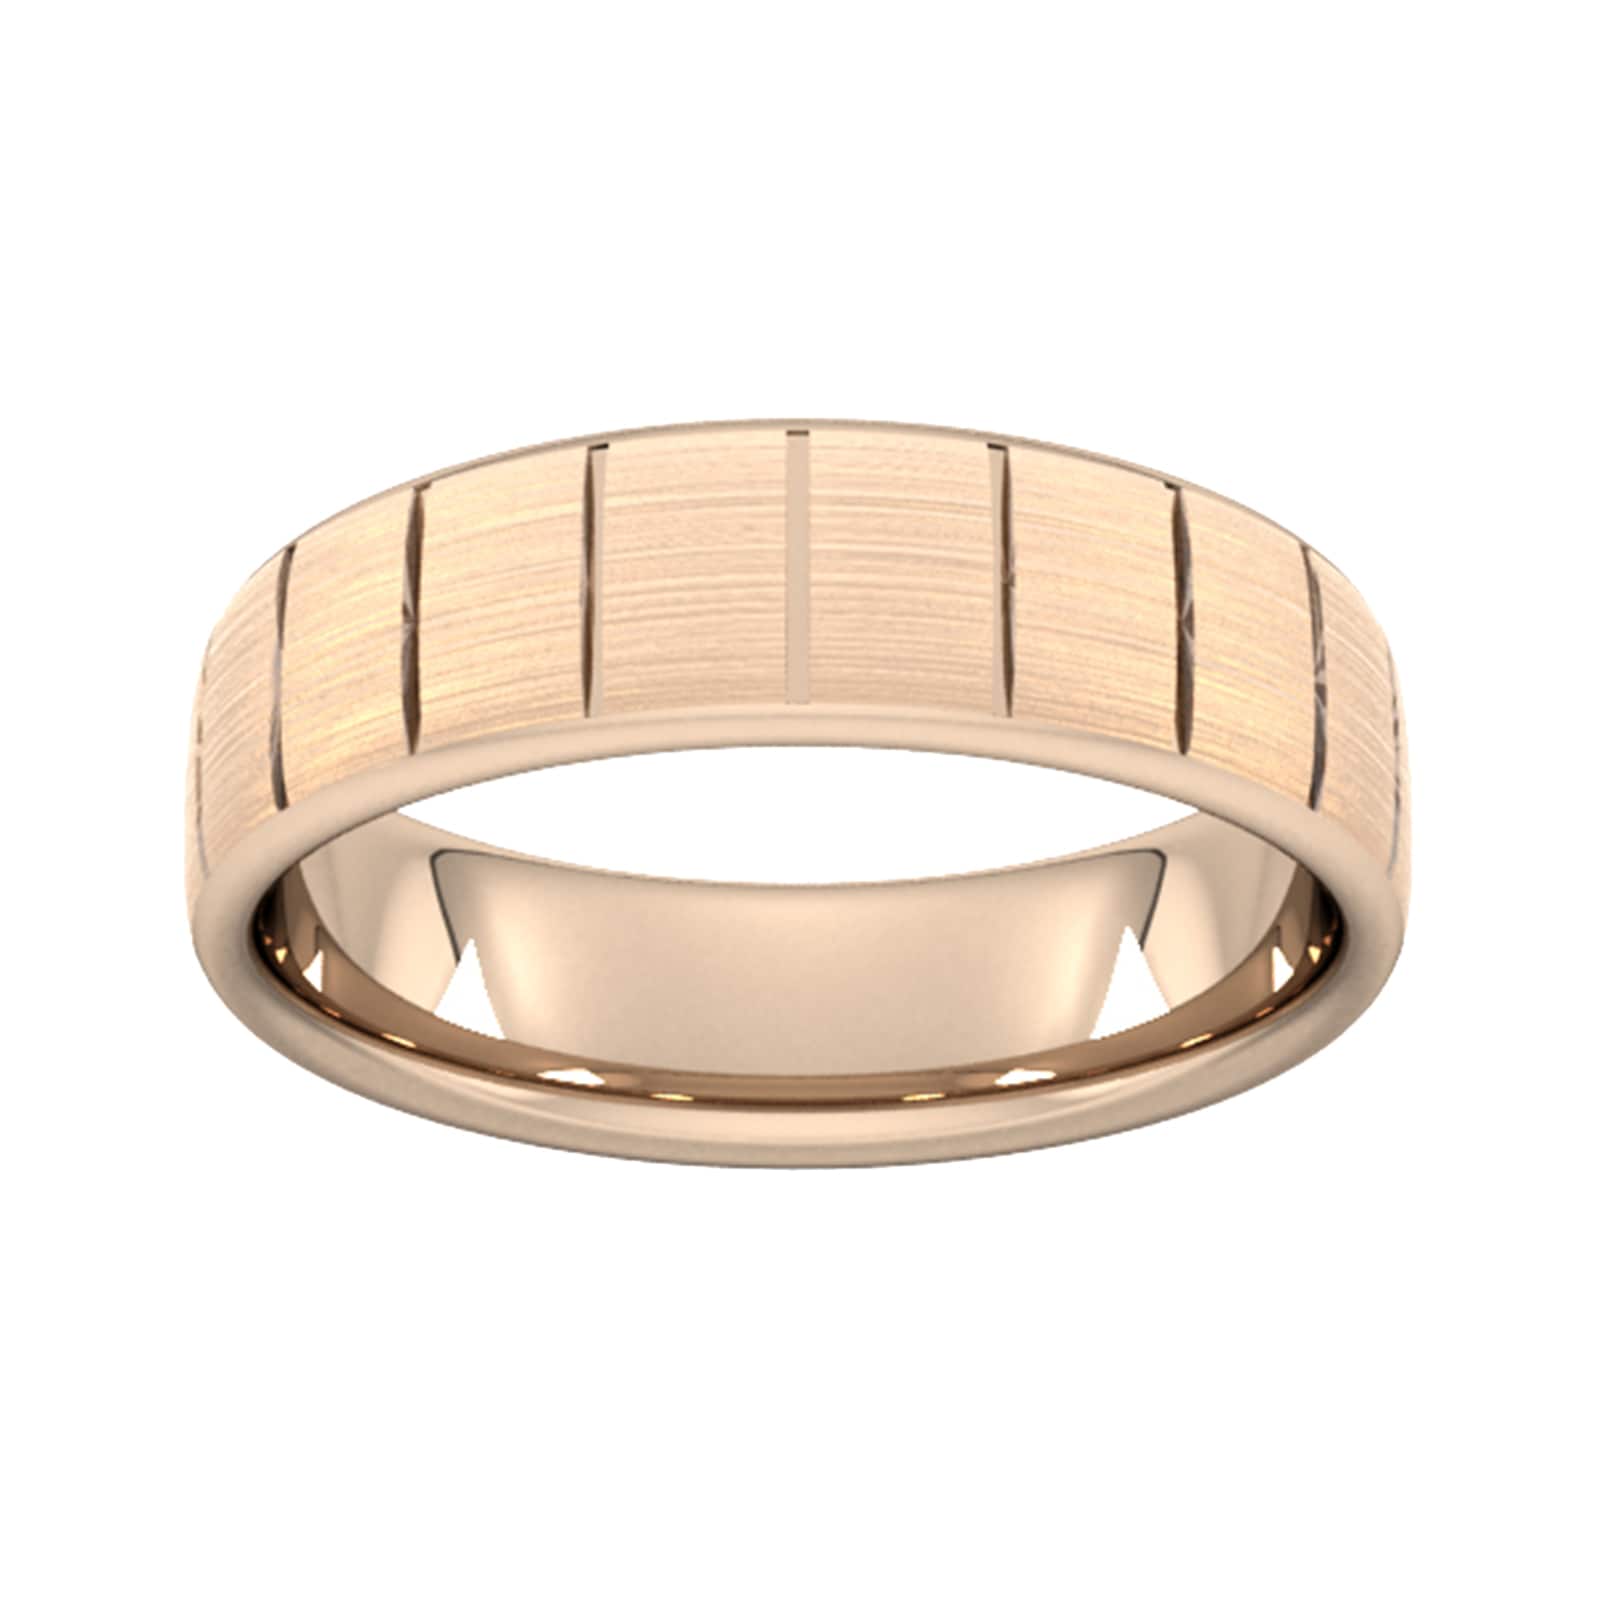 5mm Traditional Court Heavy Vertical Lines Wedding Ring In 9 Carat Rose Gold - Ring Size S